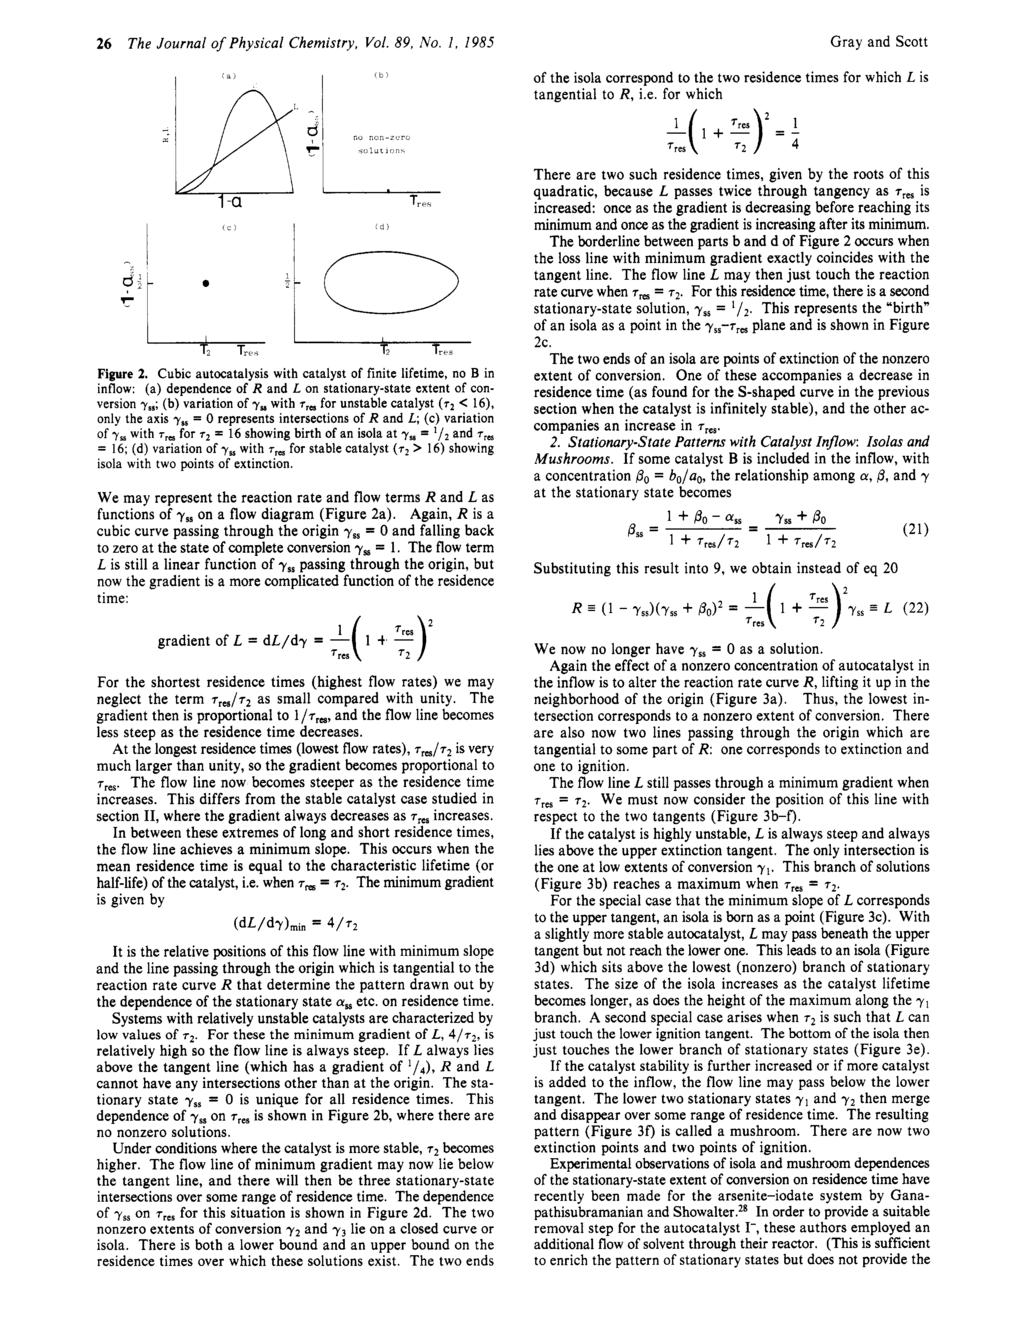 26 The Journal of Physical Chemistry, Vol. 89, No. 1, I985 I Gray and Scott of the isola correspond to the two residence times for which L is tangential to R, i.e. for which Figure 2.